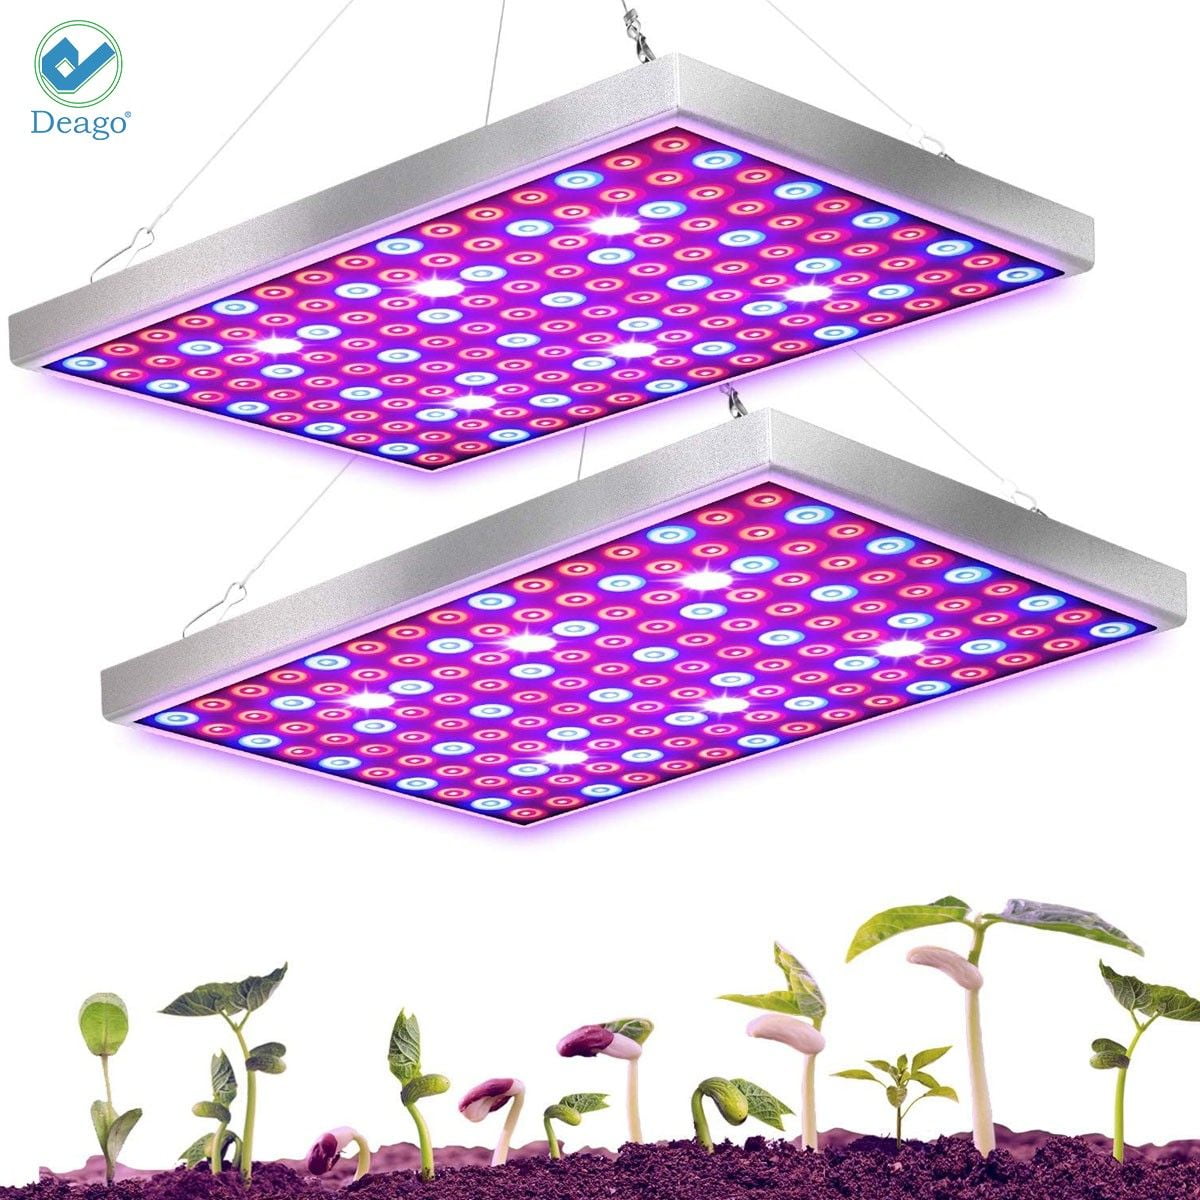 LED Grow Light Hydroponic Full Spectrum Indoor Plant Flower Growing Bloom 25/45W 